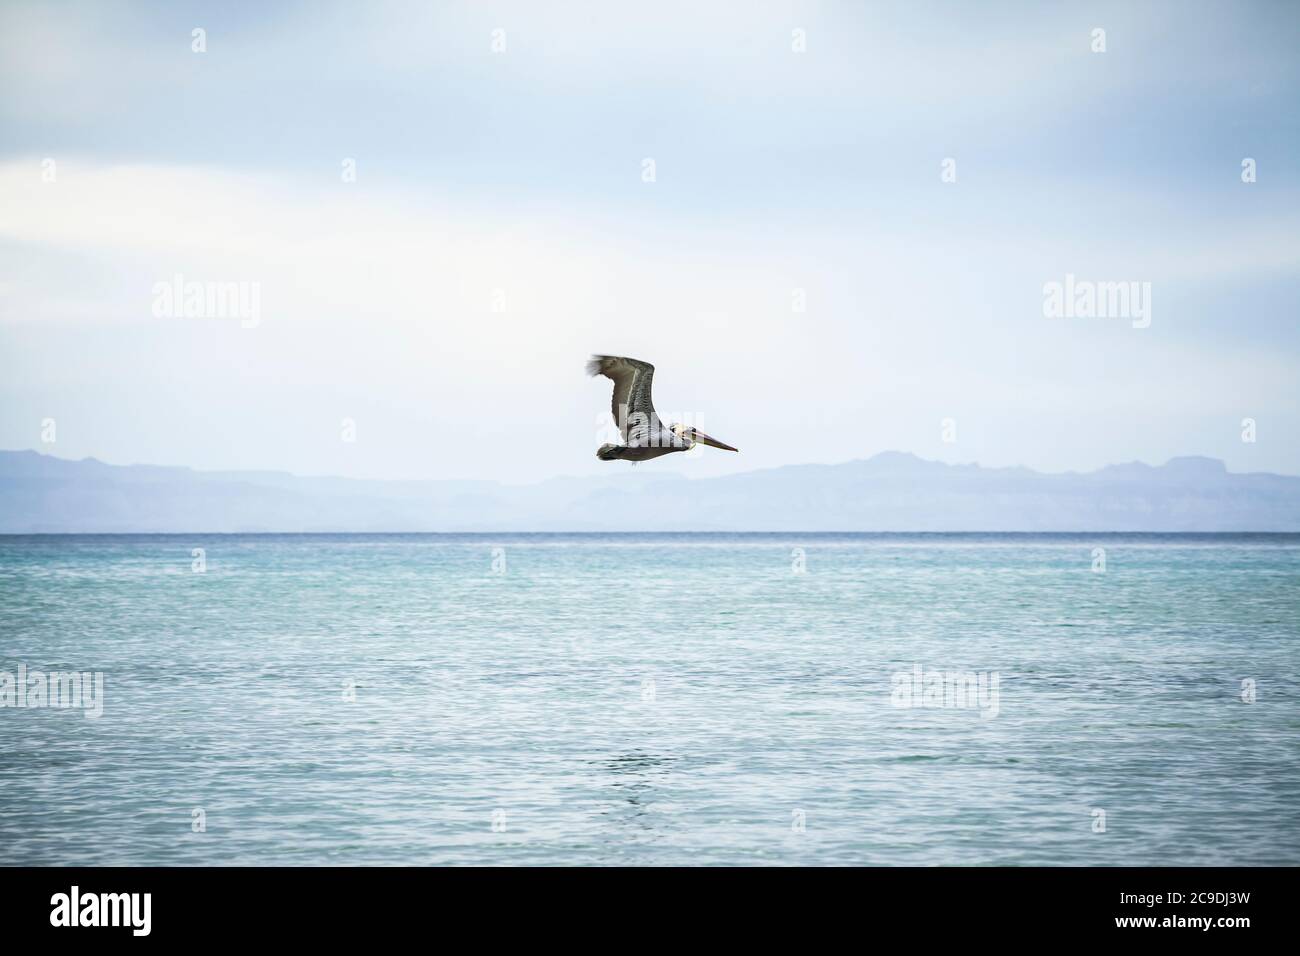 A solitary Brown Pelican flying off the coast of Isla Espirito Santo, Gulf of California with the mainland Baja in the distance, BCS, Mexico. Stock Photo